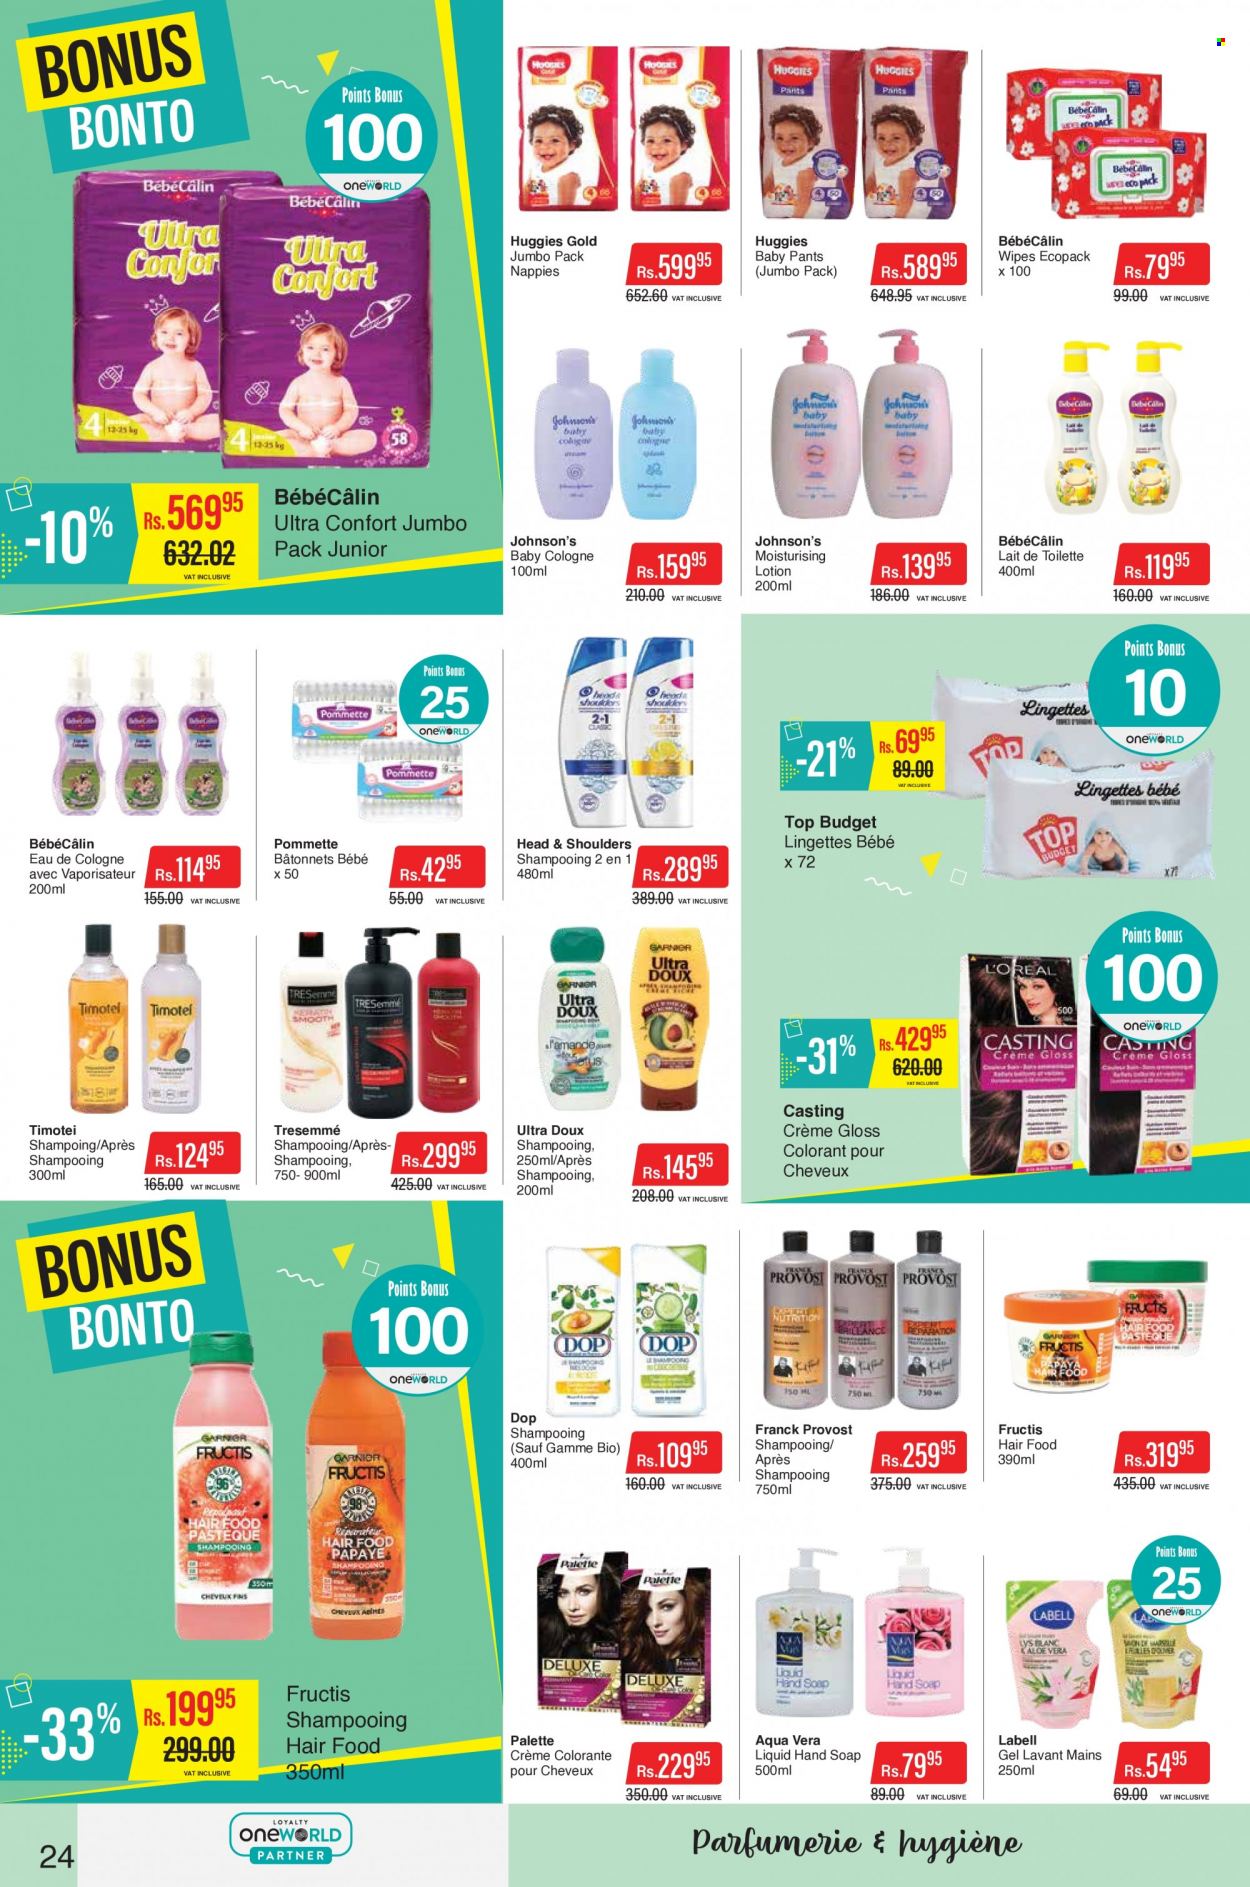 thumbnail - Intermart Catalogue - 24.03.2023 - 10.04.2023 - Sales products - wipes, pants, nappies, Johnson's, baby pants, hand soap, soap, TRESemmé, Head & Shoulders, Palette, Fructis, body lotion, cologne, Franck Provost, Huggies. Page 24.